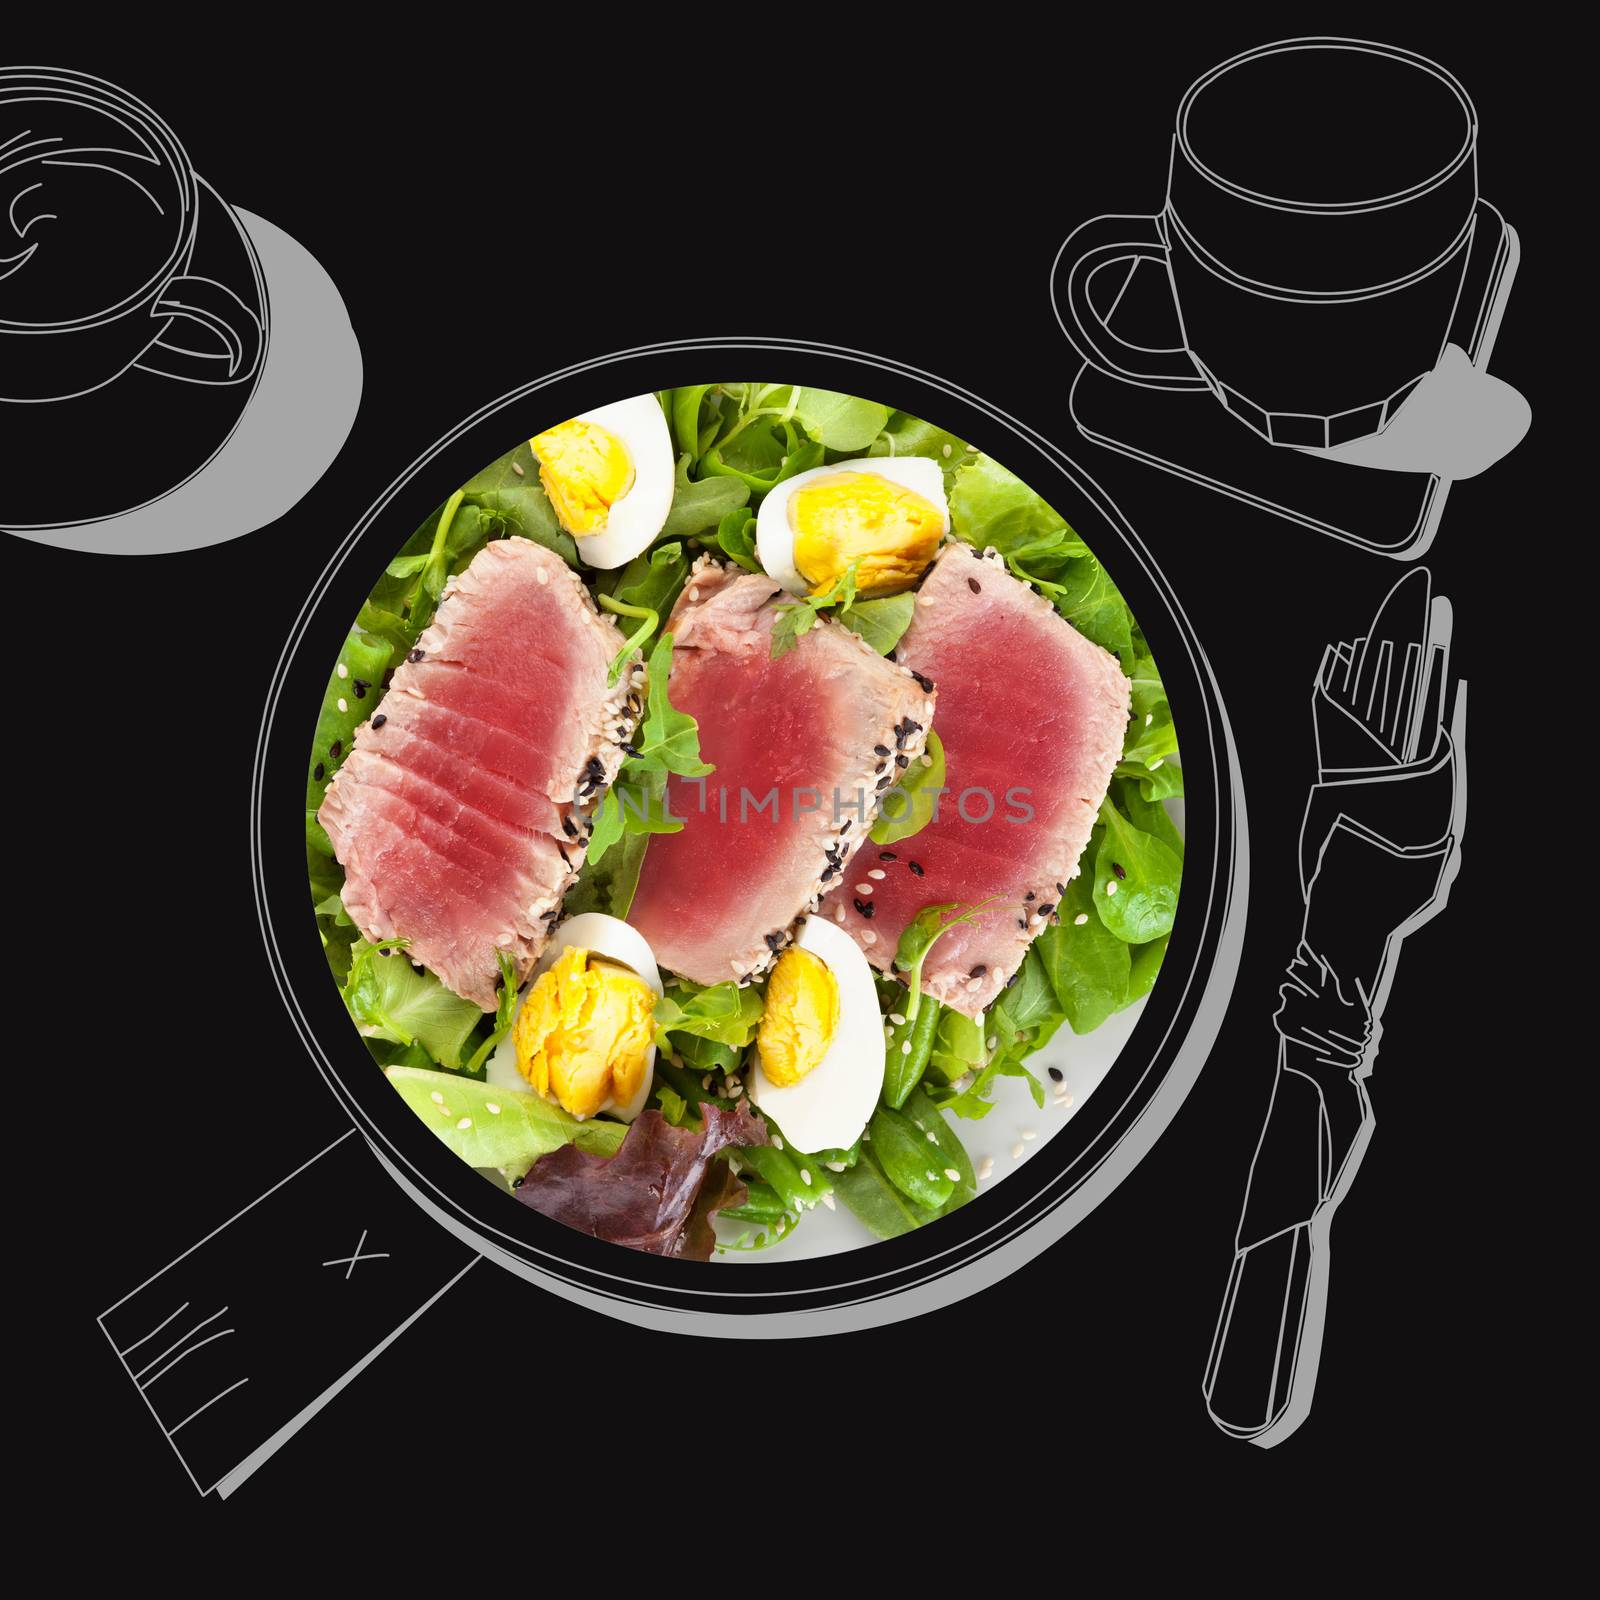 Delicious tuna steak with salad. Fine dining, exquisite luxurious gastronomy background. 